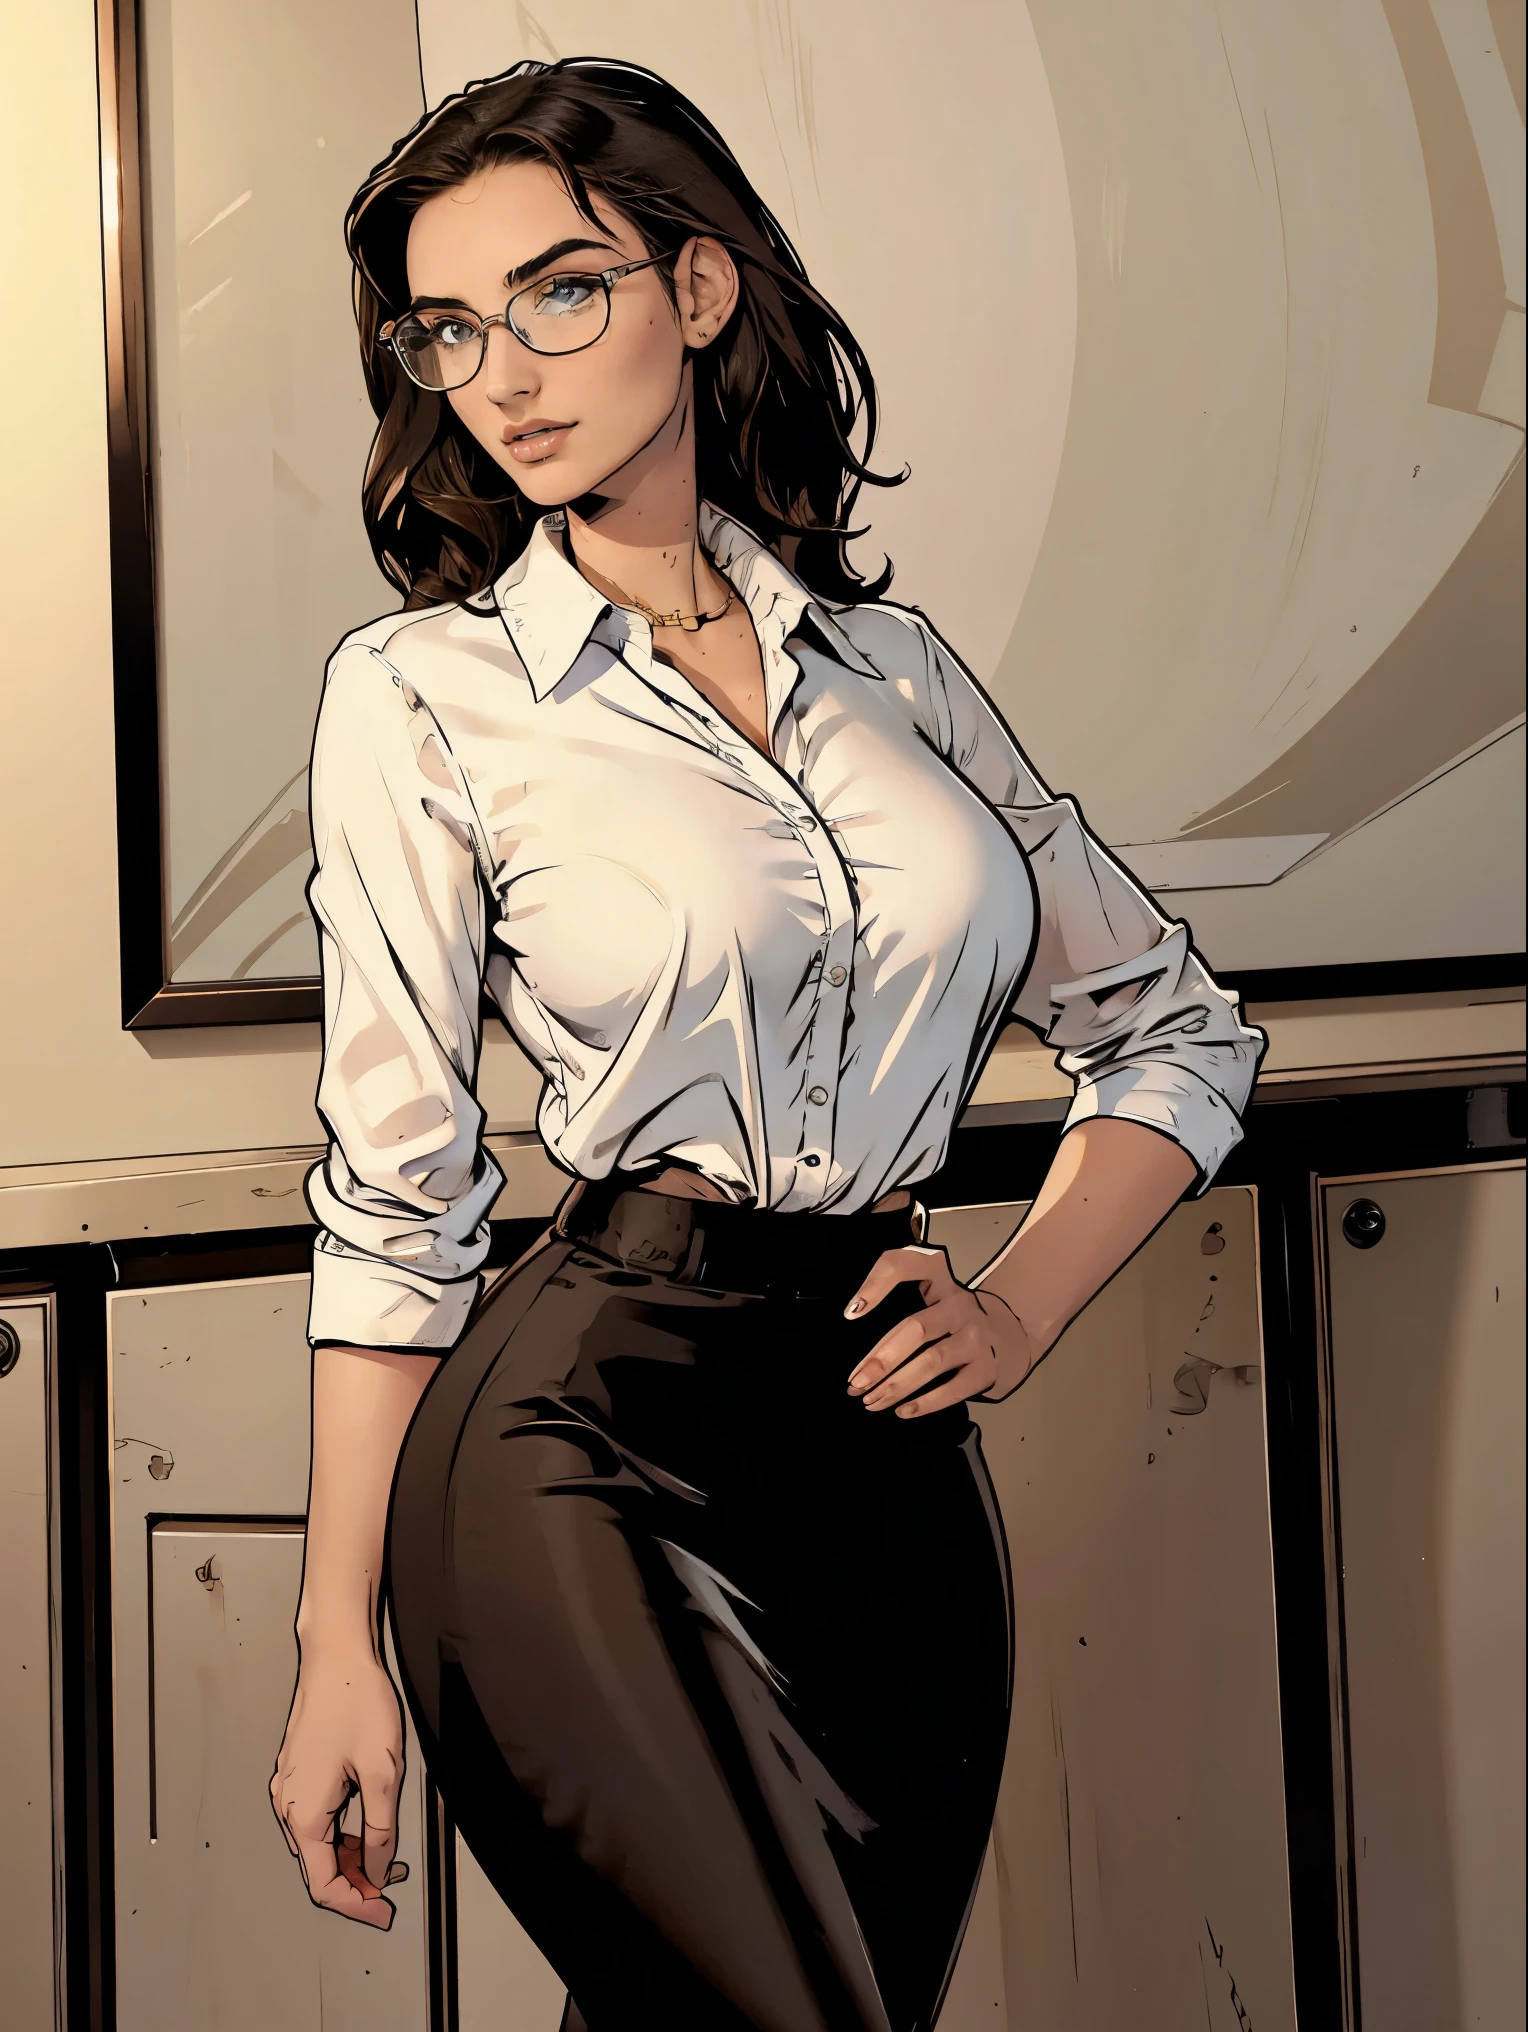 Gorgeous and sultry busty athletic (thin) brunette with sharp facial features wearing a white blouse and black pencil skirt, glasses